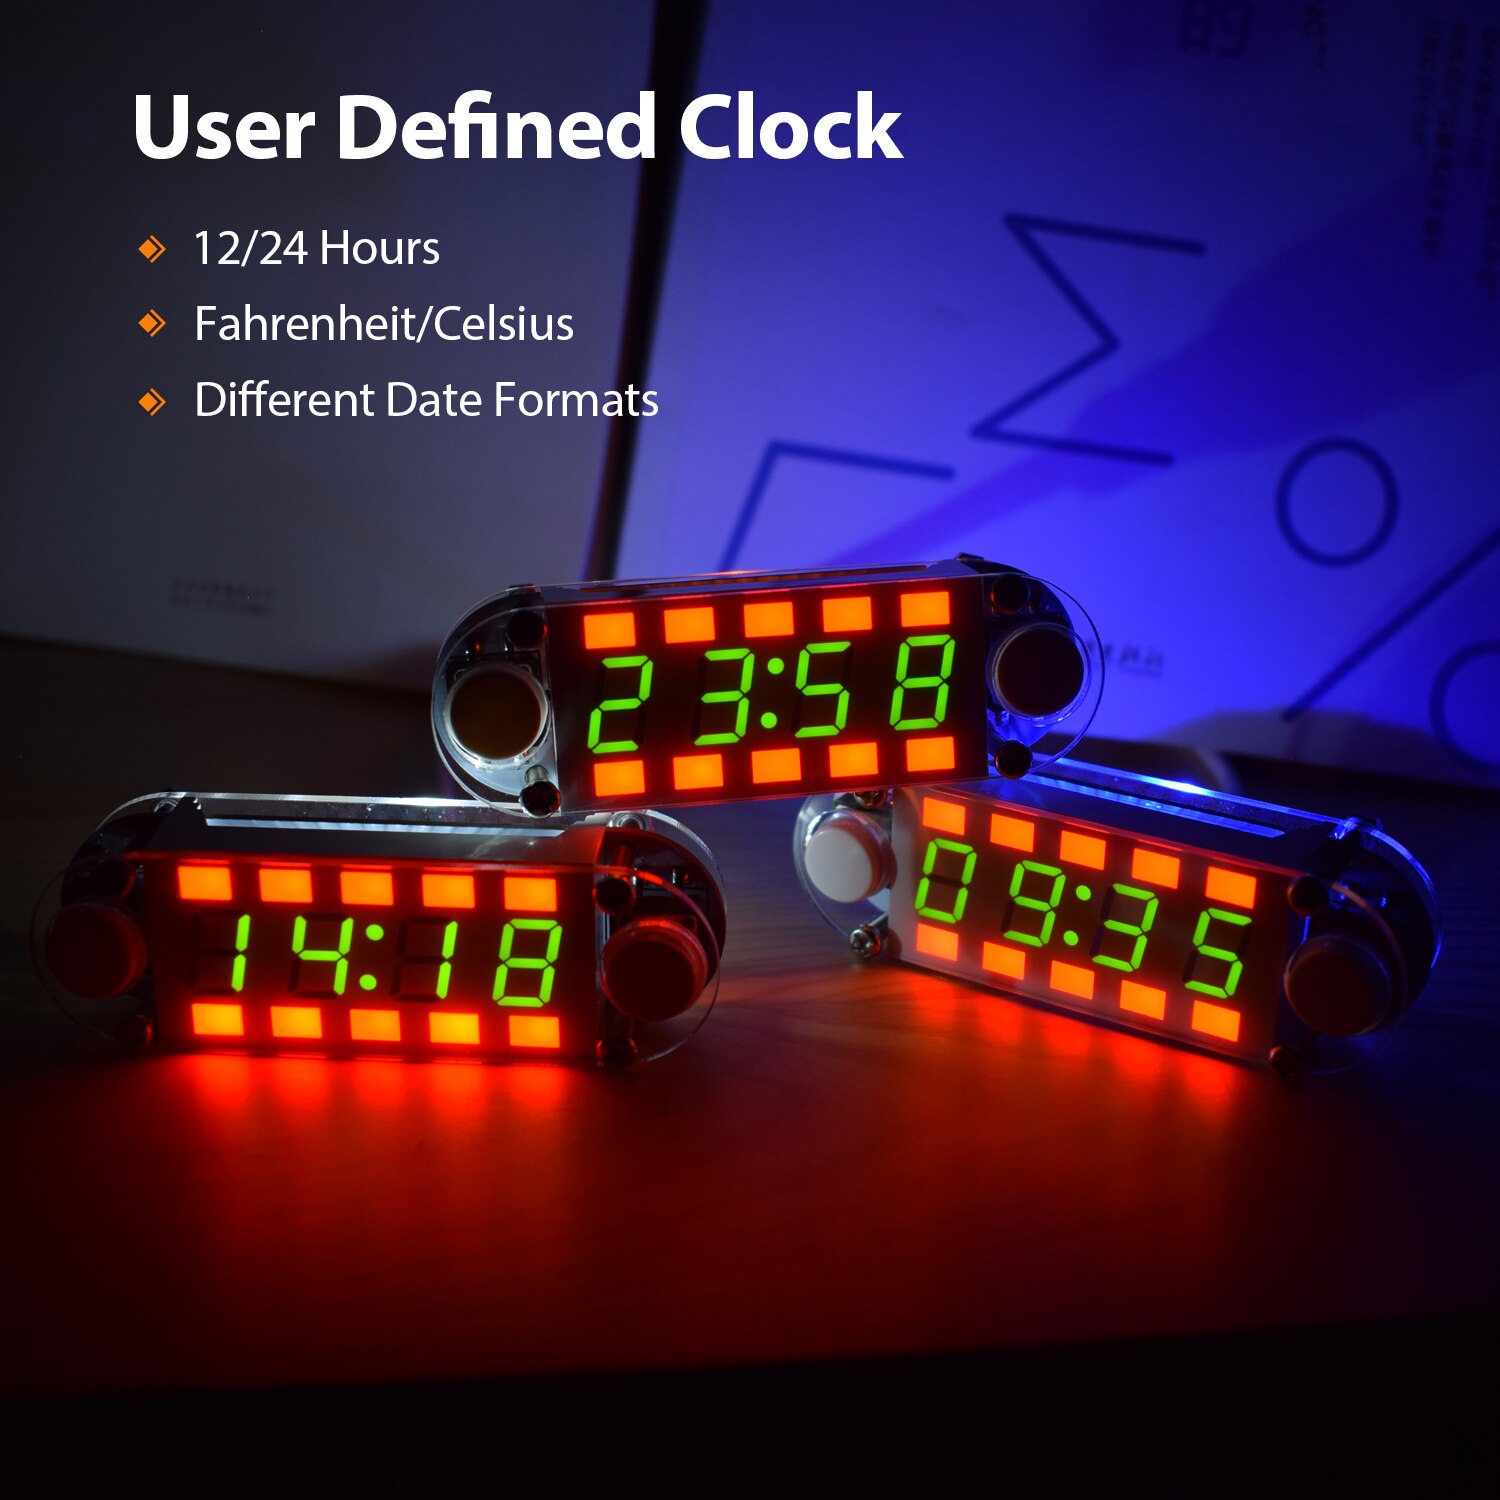 4-Digit Digital Clock DIY Kit LED Mixed Color Nixie Tube Table Desk USB-Powered Clock with Countdown Timer Stopwatch Alarm Light